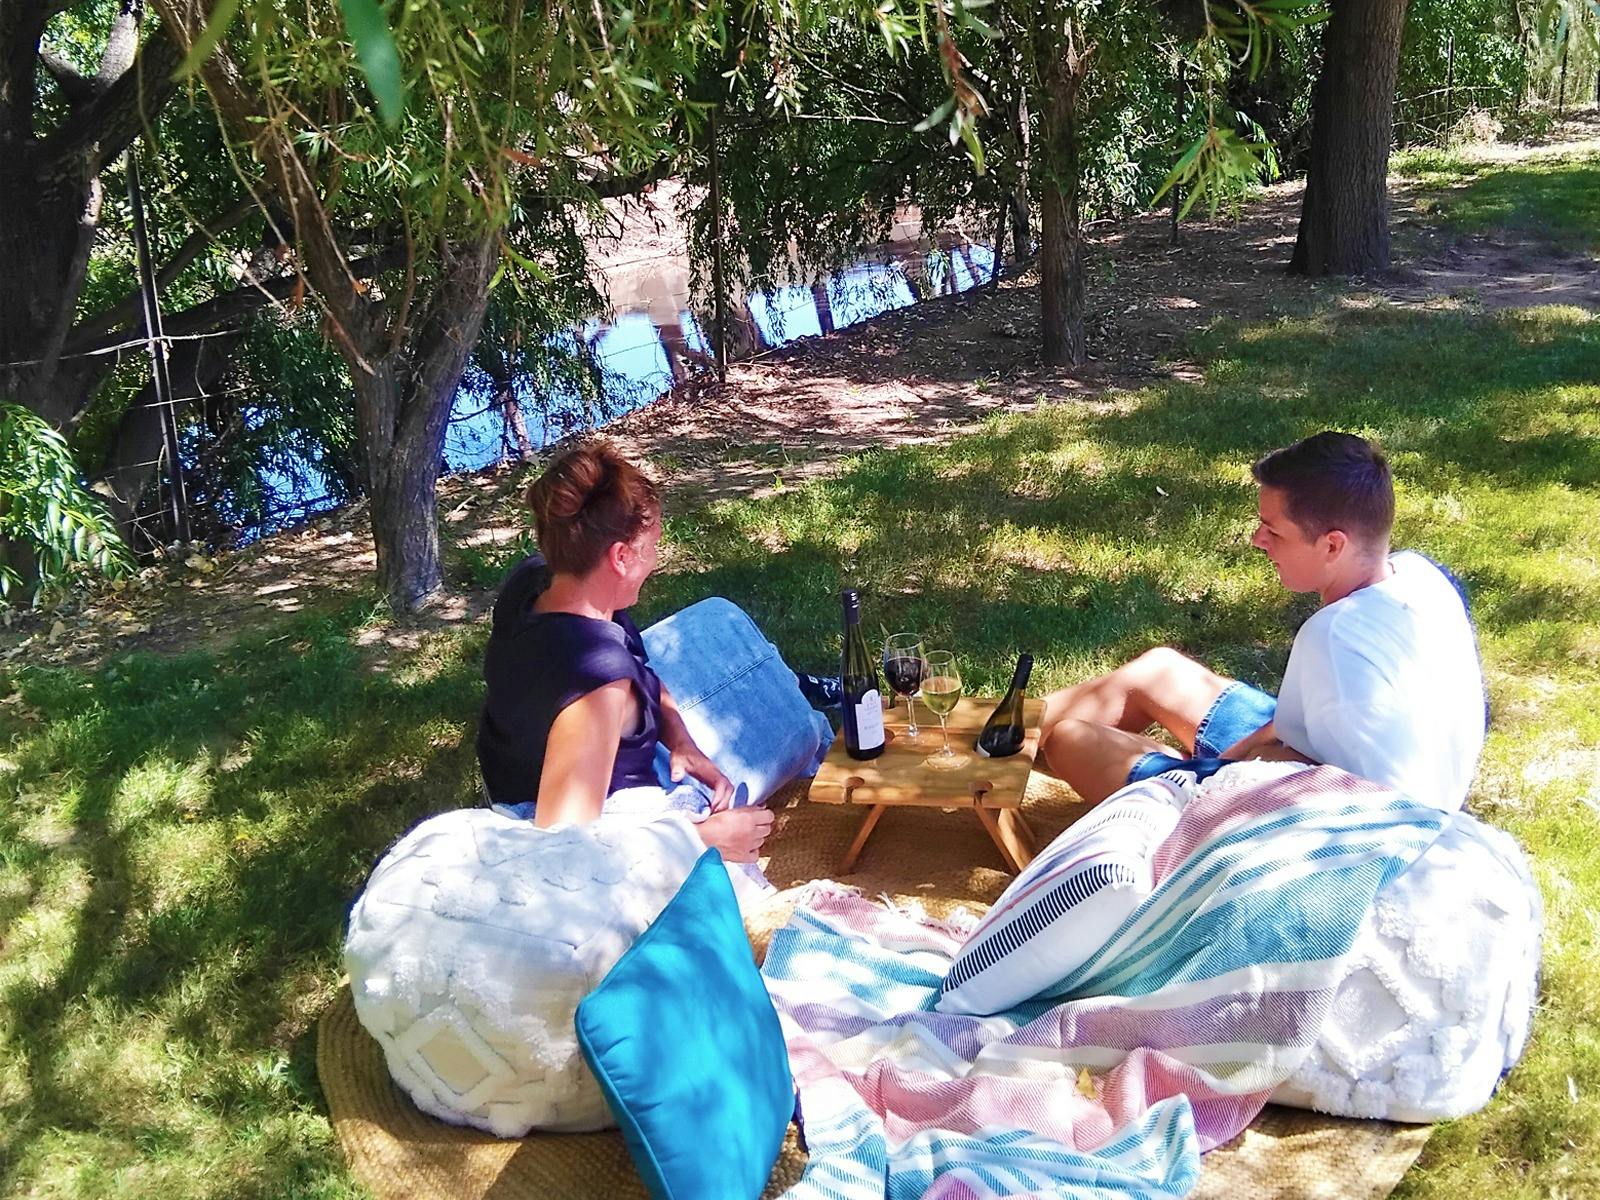 Enjoy a picnic on the banks of the King River with a glass of John Gehrig Wines in the King Valley